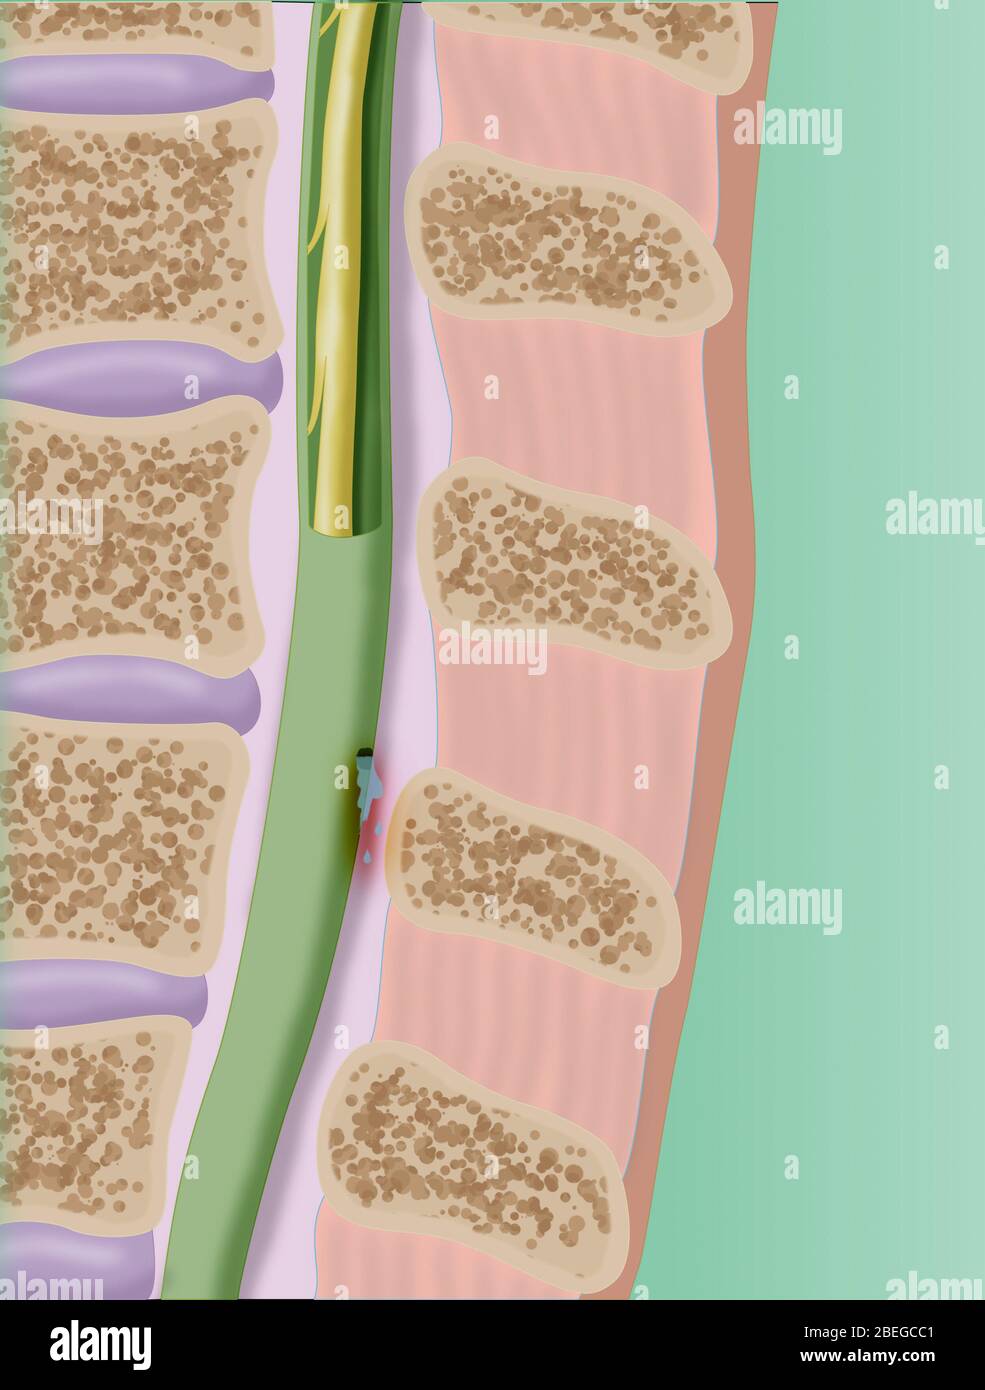 CSF Leak in the Spinal Cord, Illustration Stock Photo